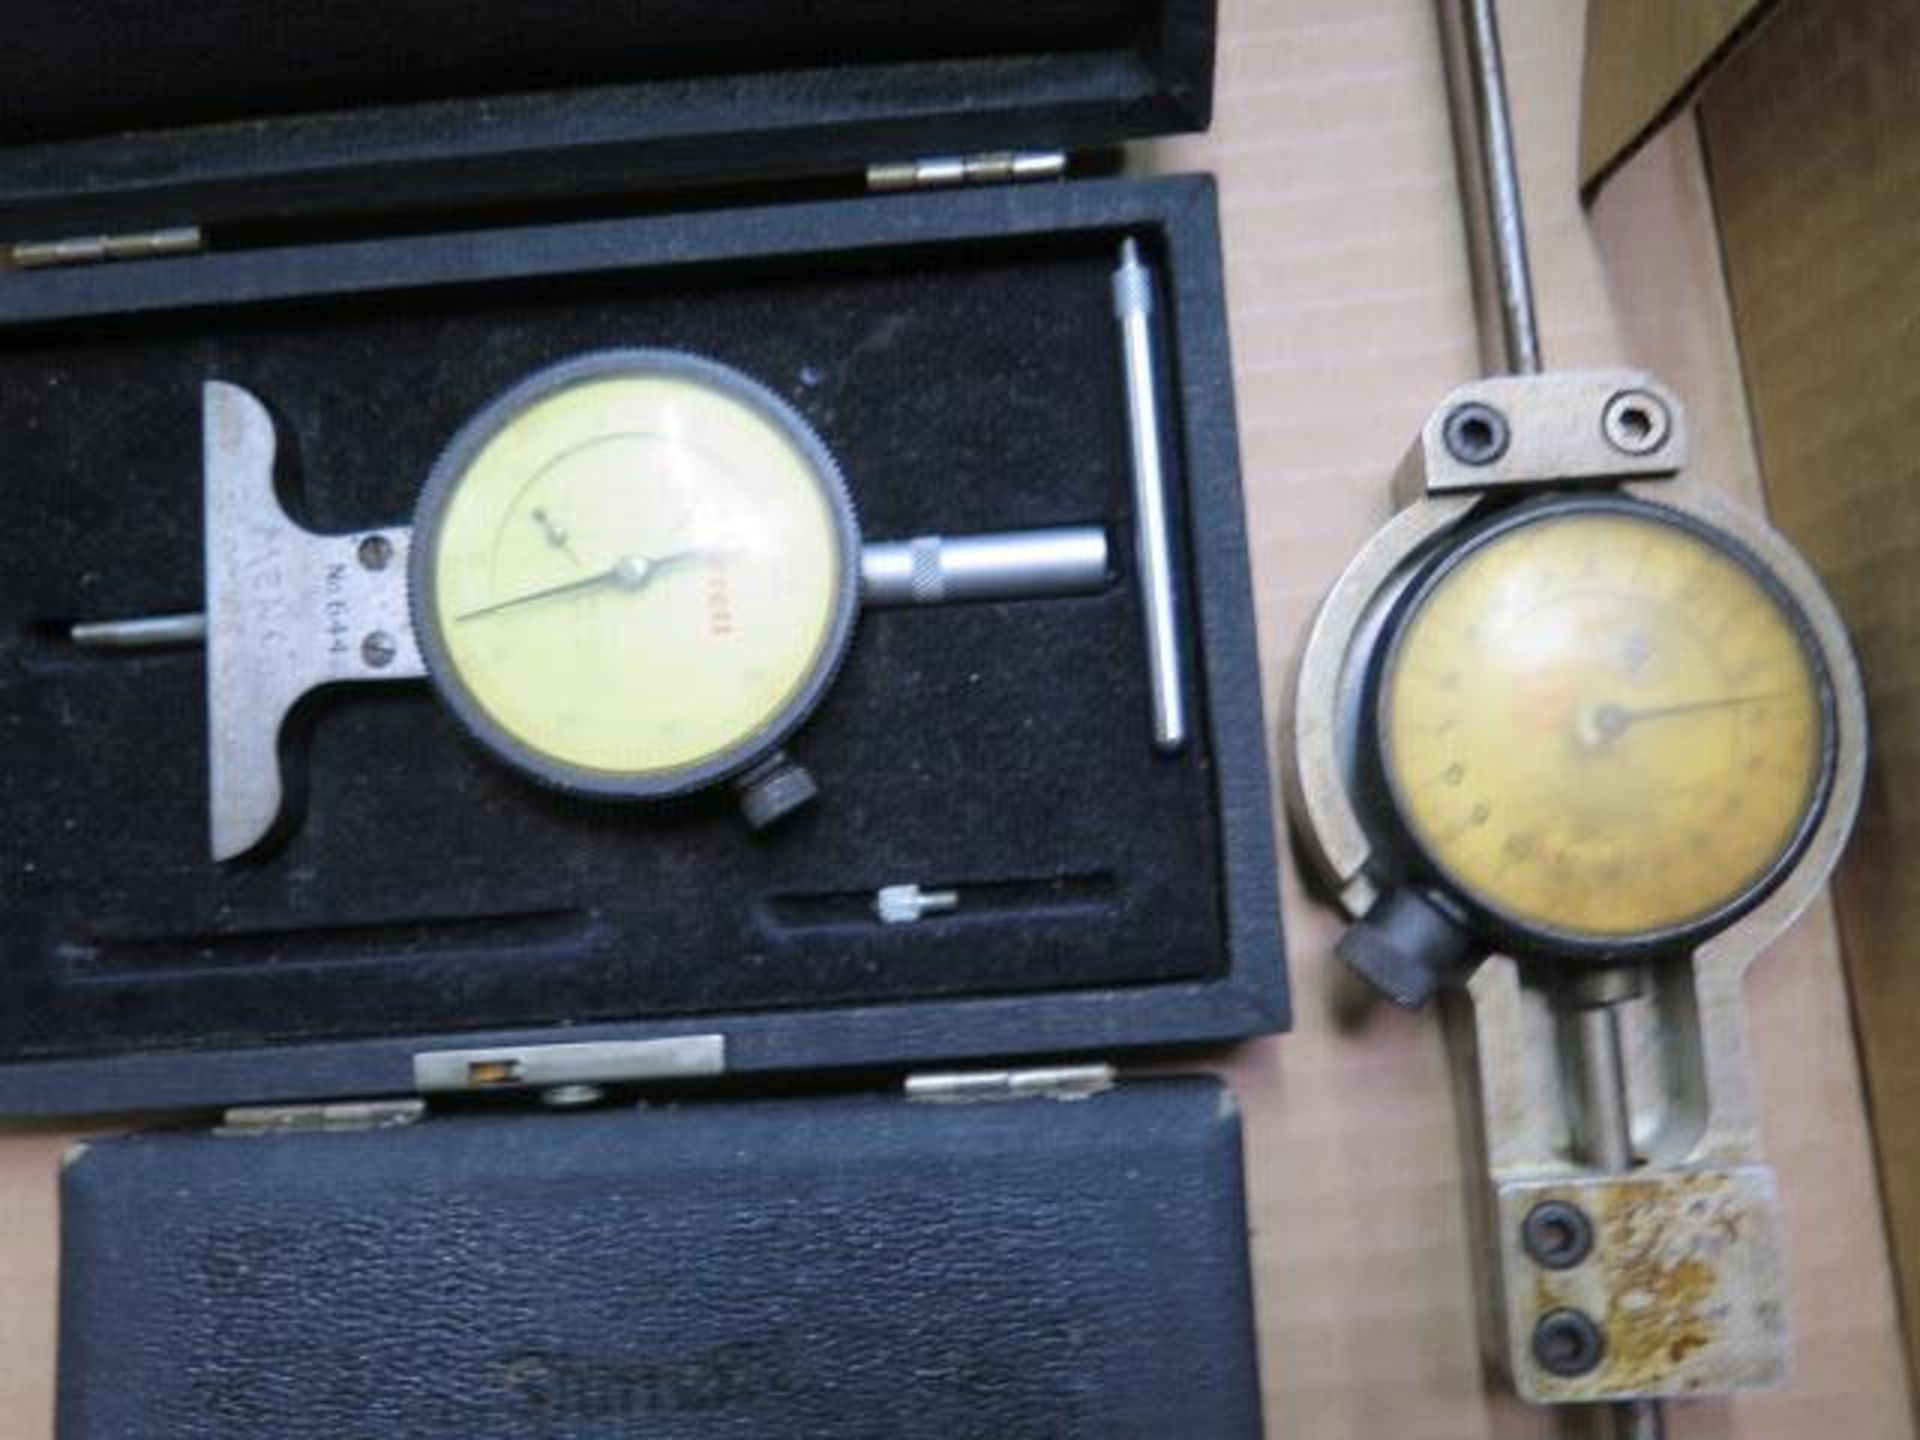 Starrett Dial Depth Gage, Starrett 0-1" Anvil Mic and Misc Indicators (SOLD AS-IS - NO WARRANTY) - Image 3 of 4